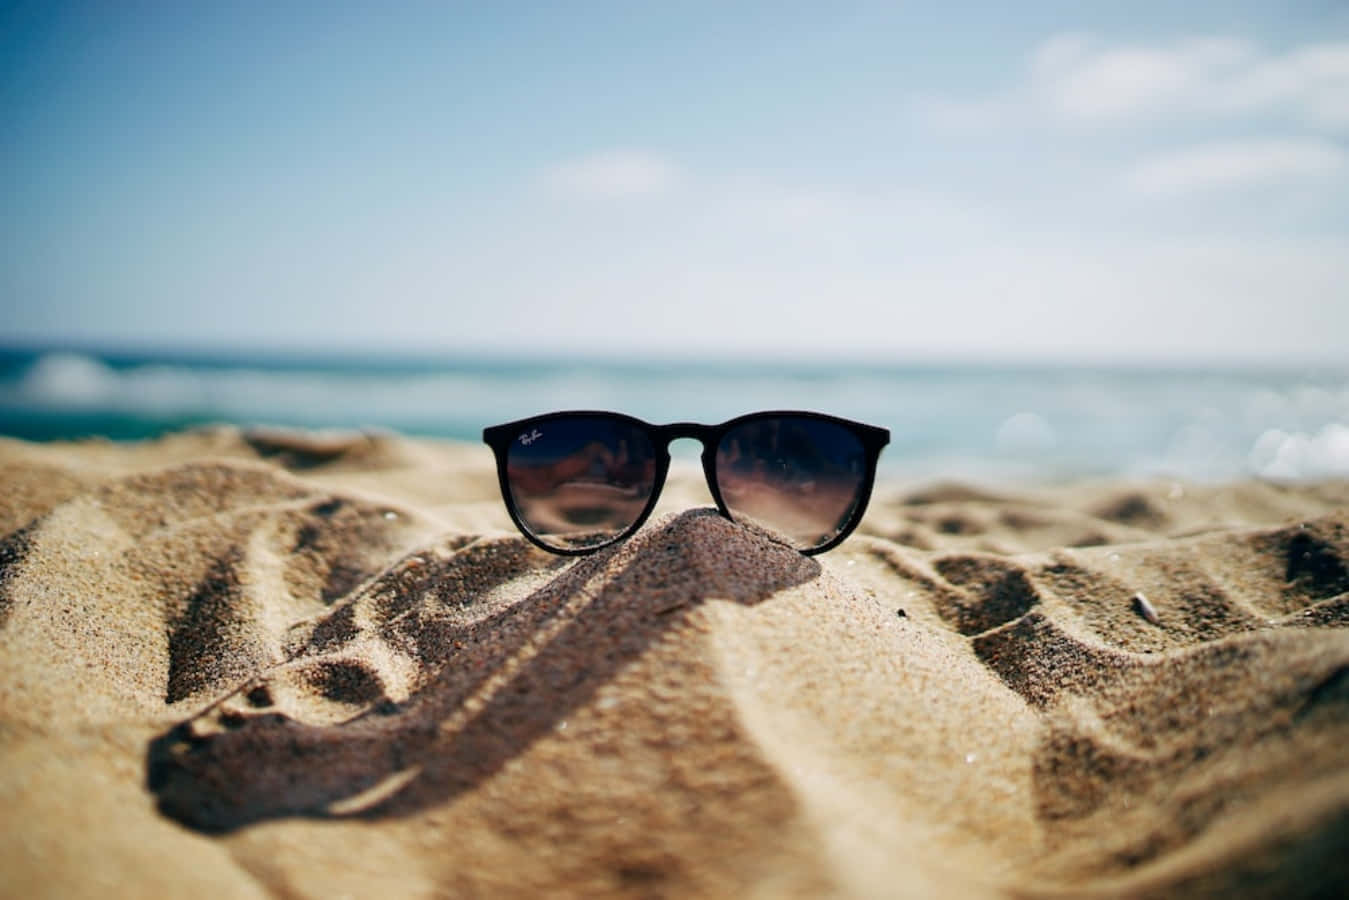 Cool Summer Sunglasses On The Sand